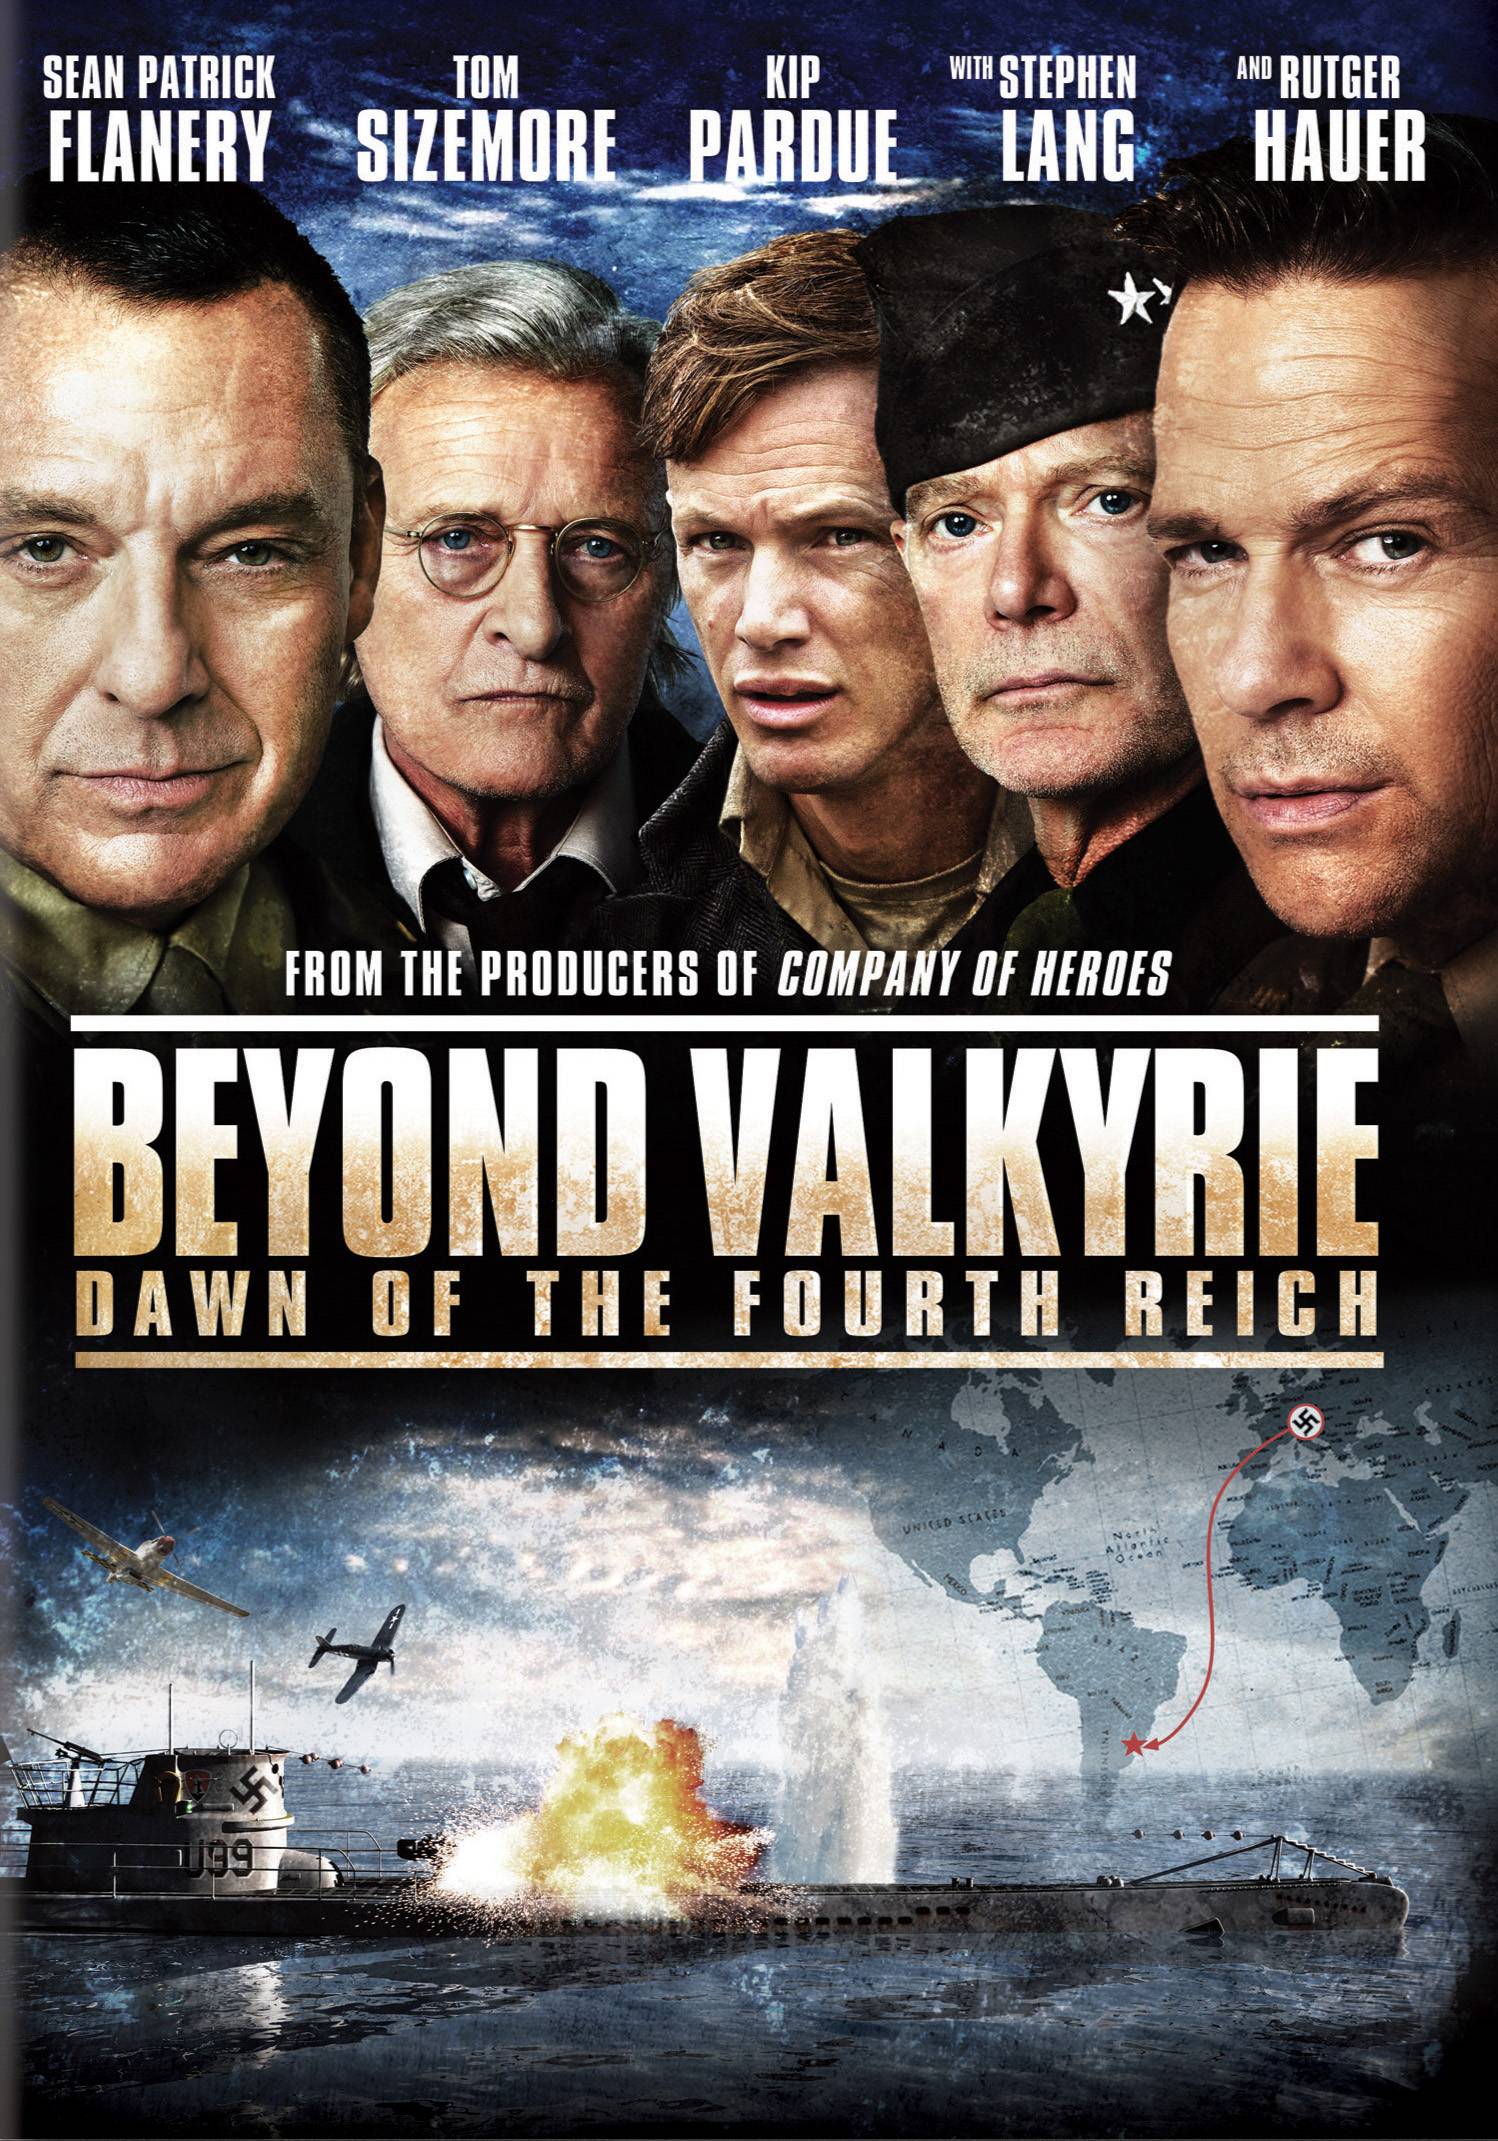 Beyond Valkyrie Exclusive Clip Features Tom Sizemore and Stephen Lang Pondering Sean Patrick Flanery's Fate